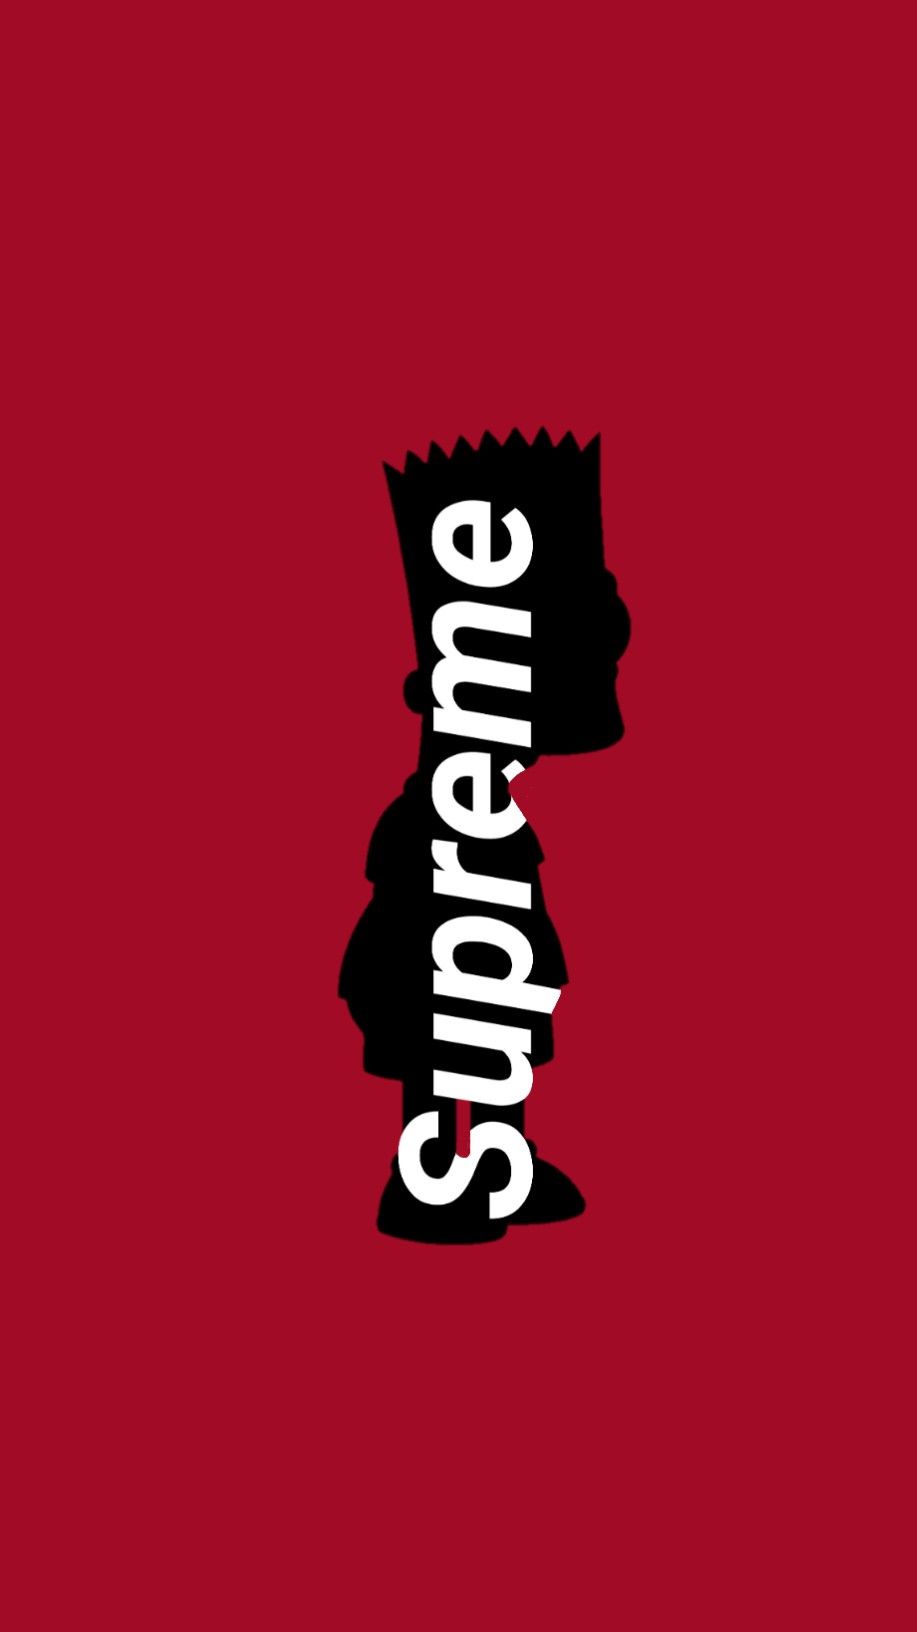 Supreme iPhone Wallpapers - Wallpaper Cave